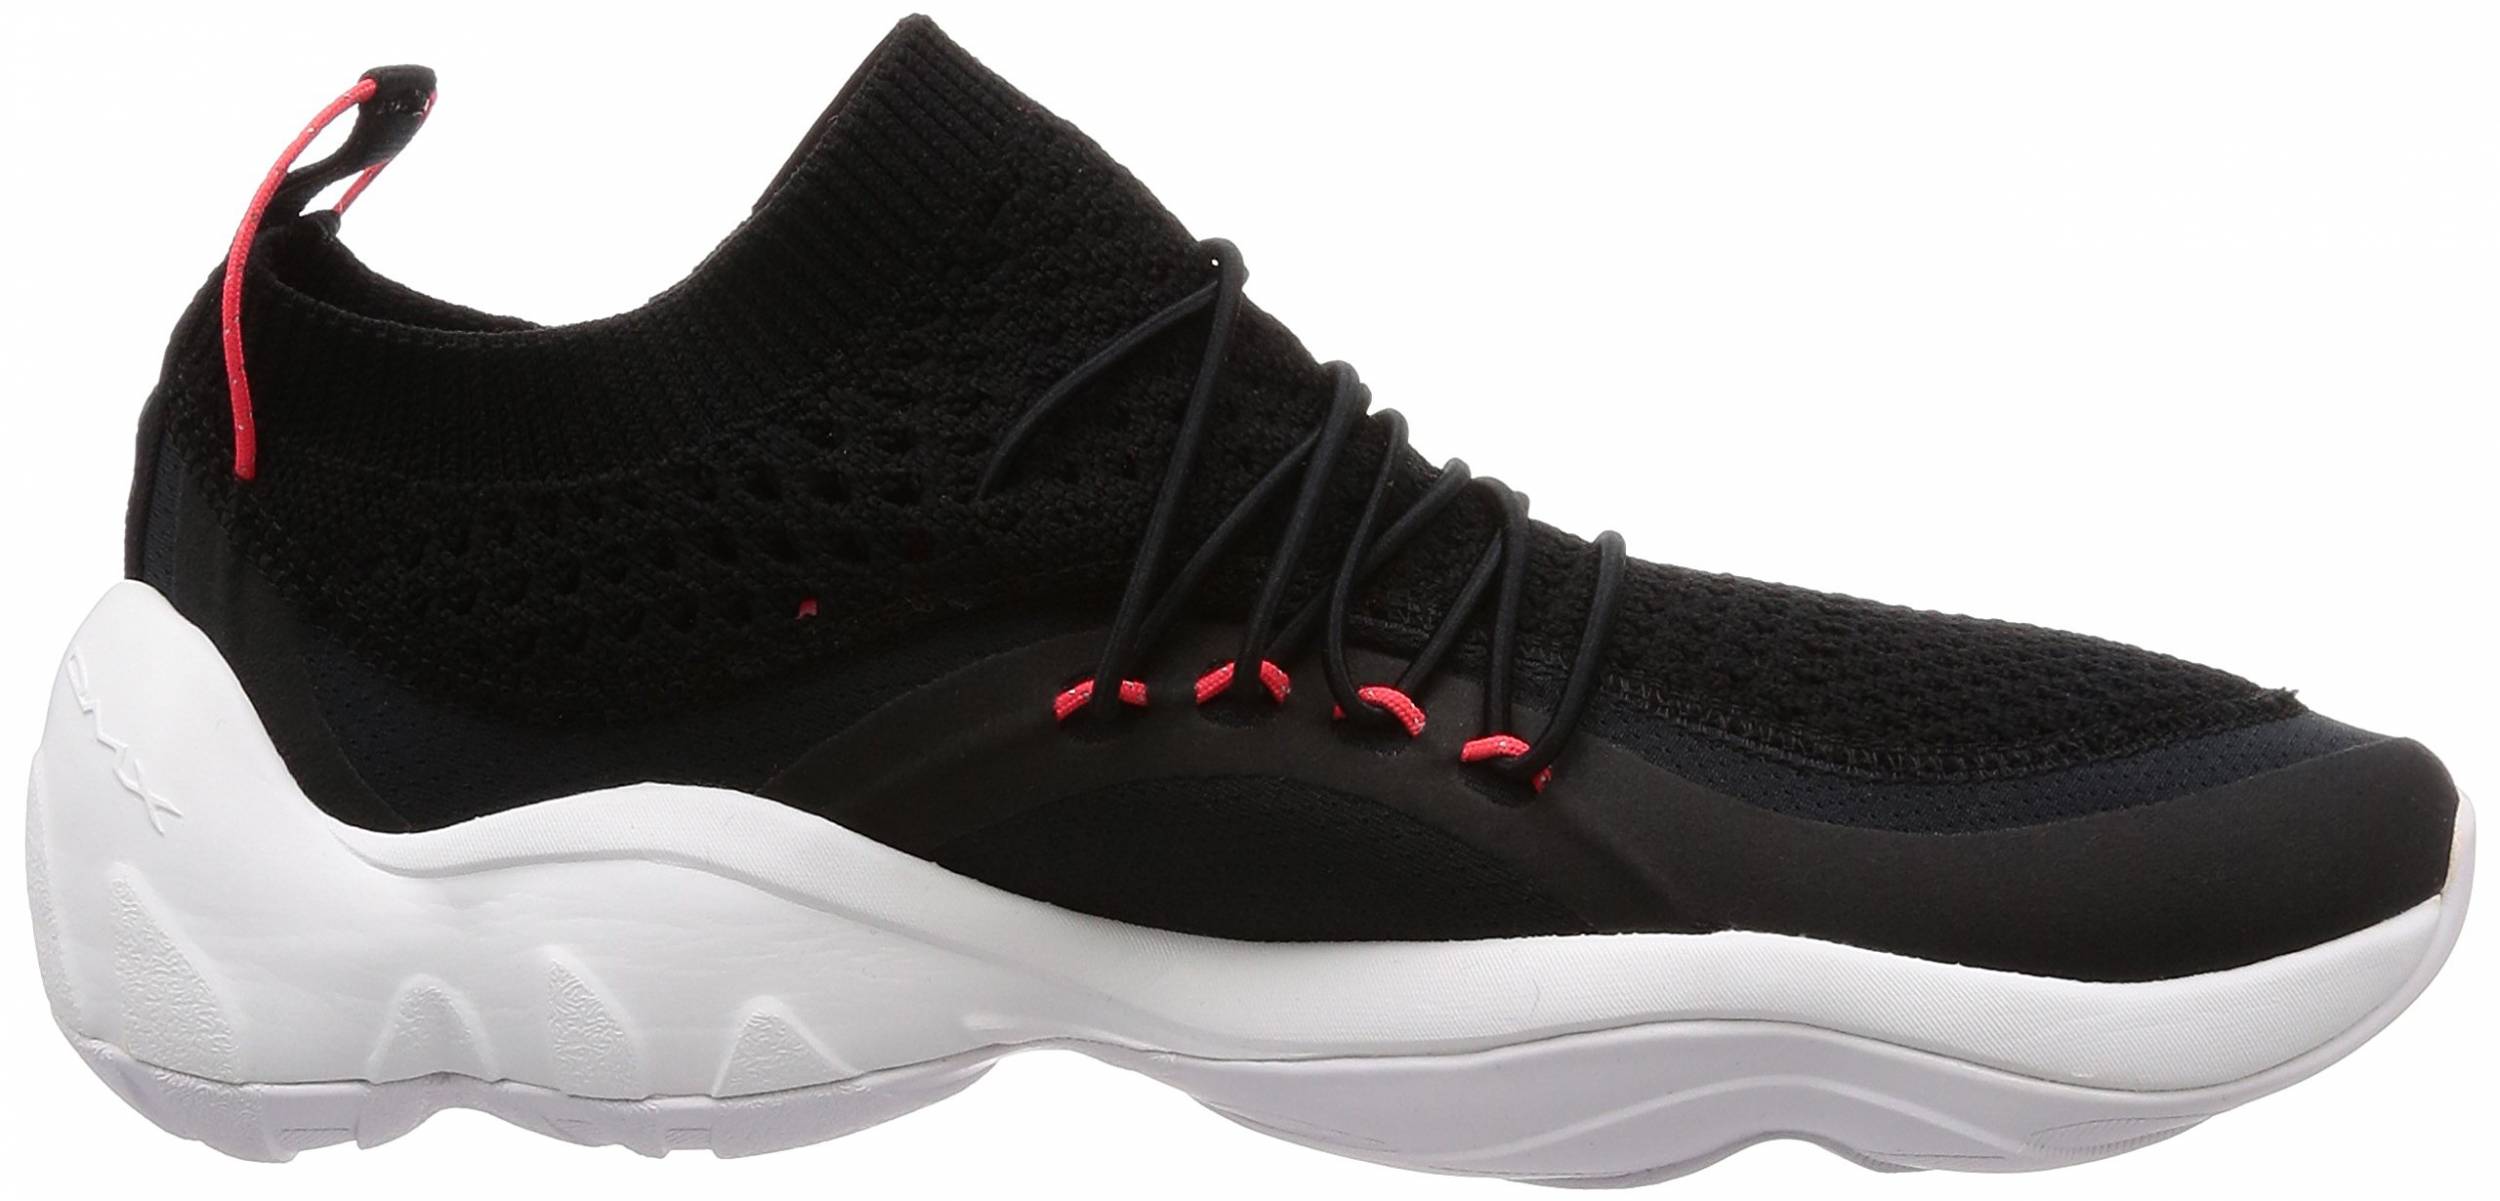 Only $32 + Review of Reebok DMX Fusion NR | RunRepeat